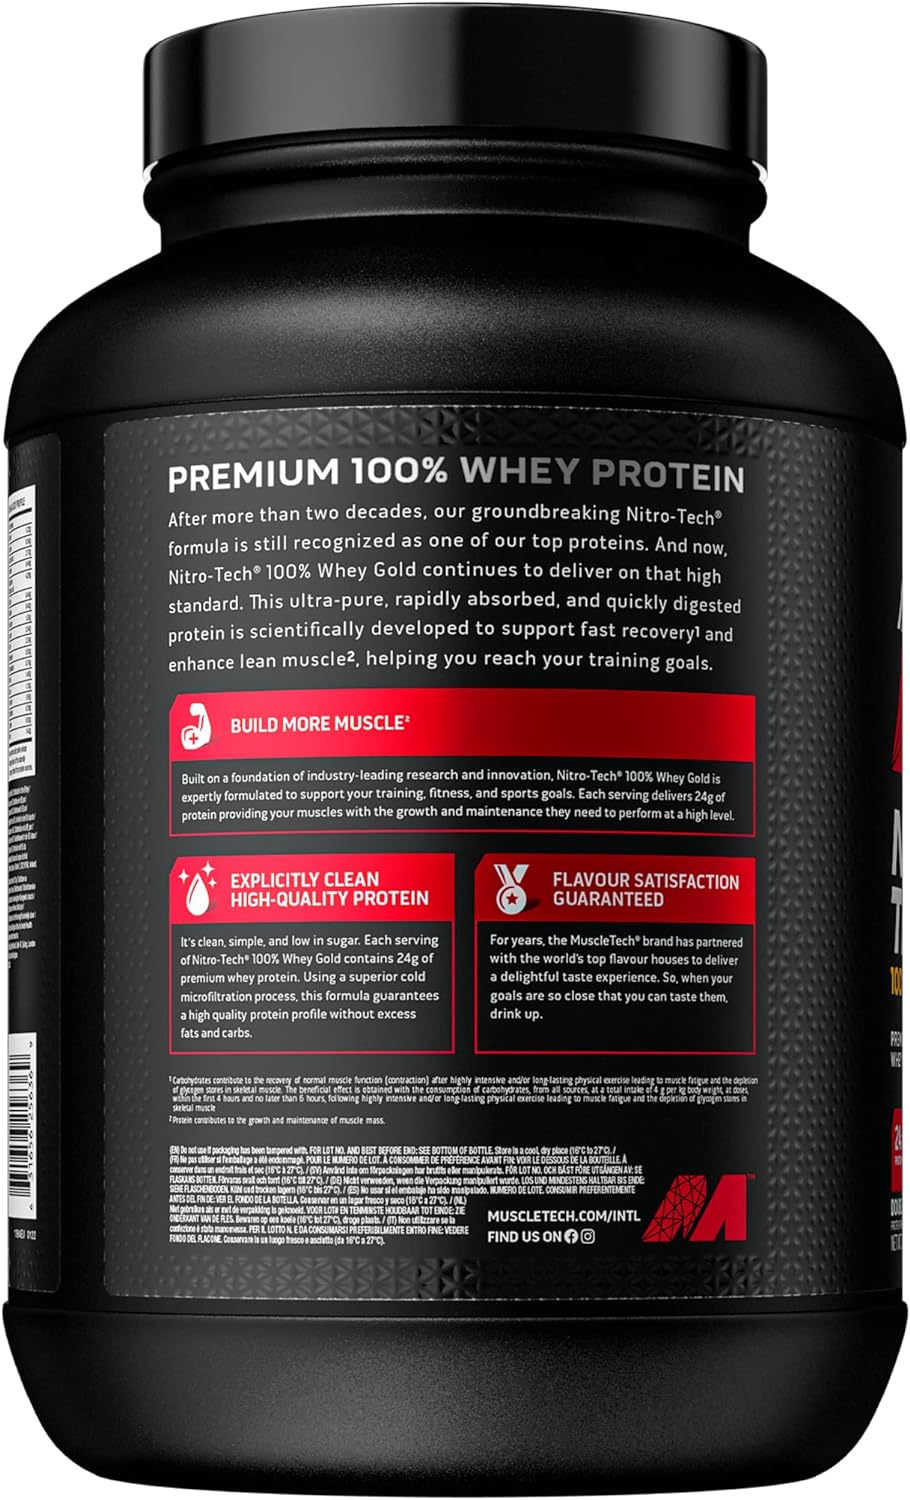 MuscleTech NitroTech 100% Whey Gold Protein Powder, Build Muscle Mass, Whey Isolate Protein Powder and Peptides, Protein Shake For Men and Women, 5.5 g BCAA